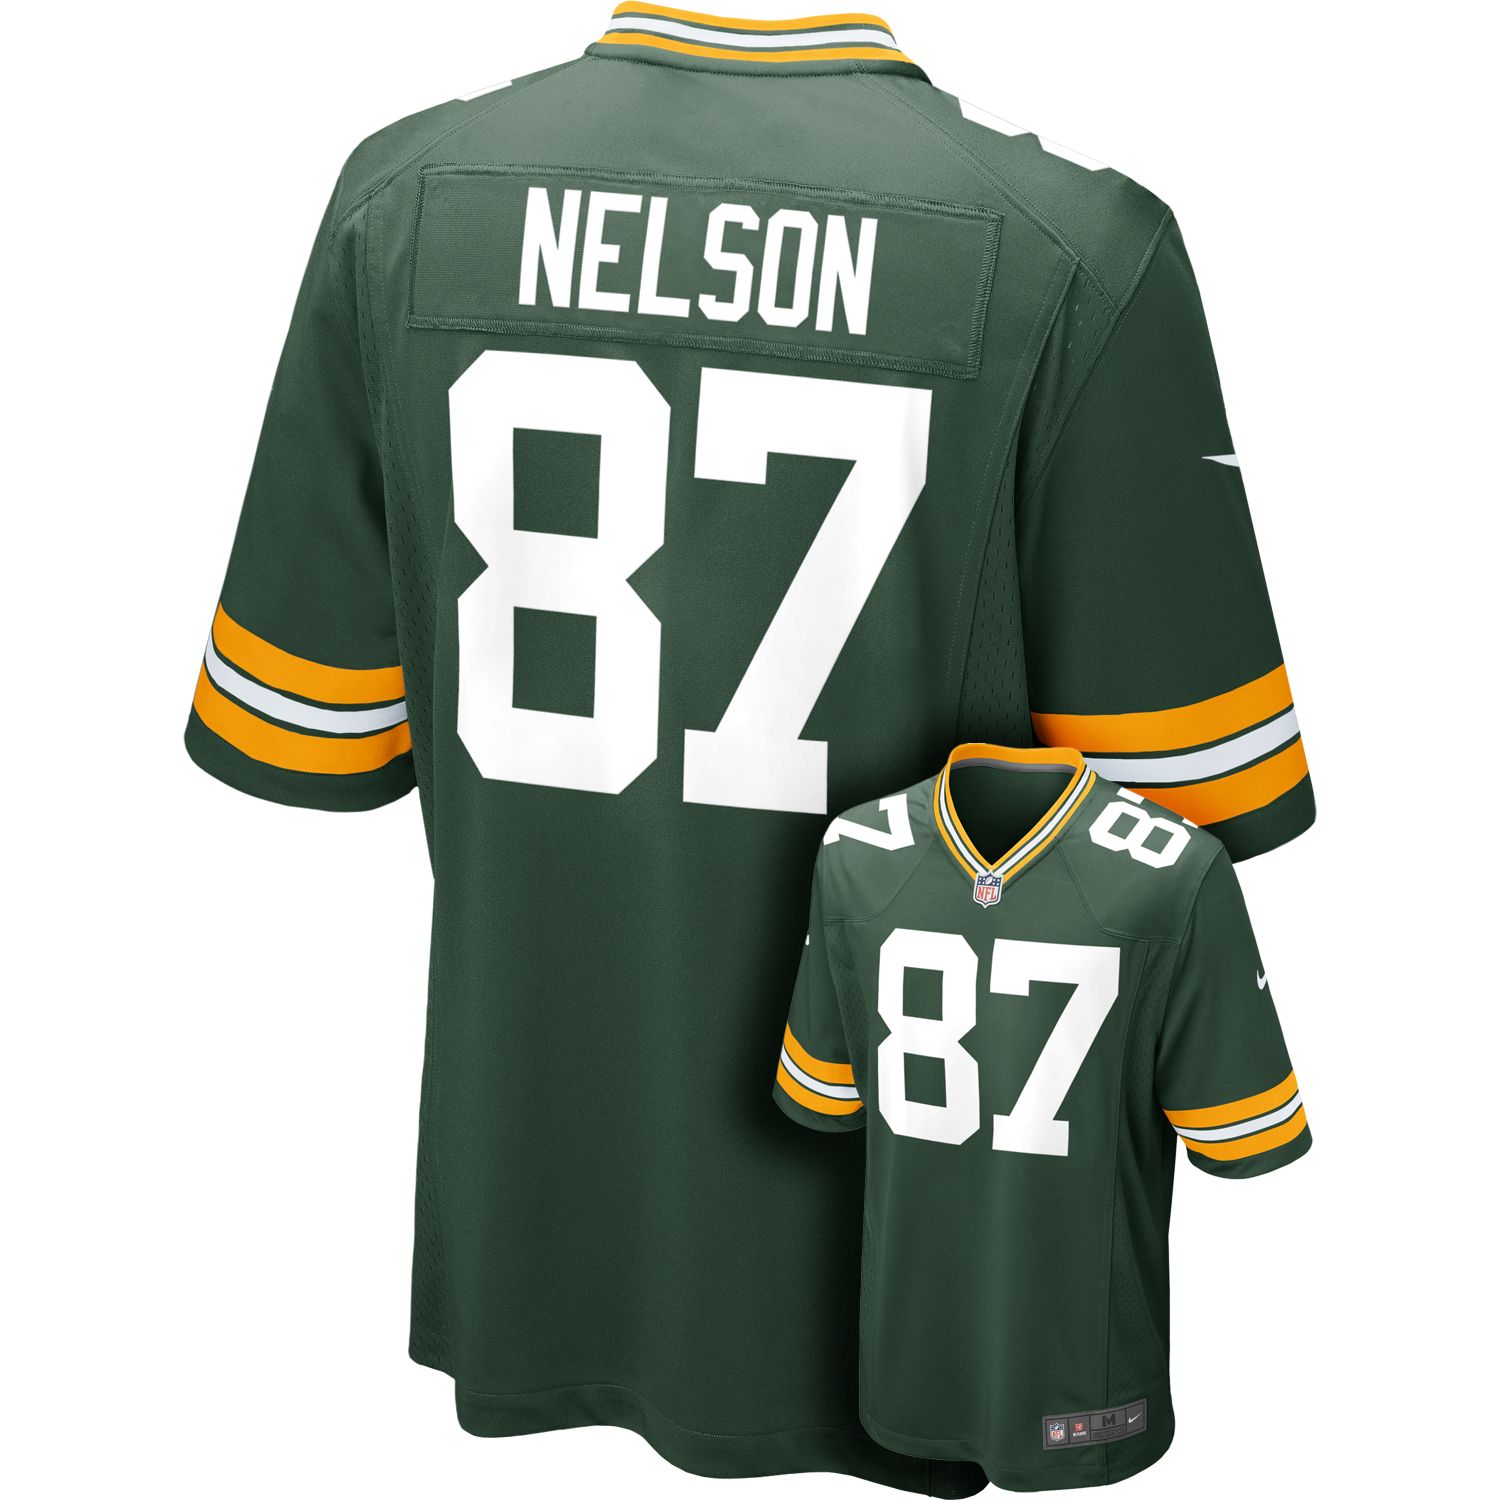 nelson packers jersey